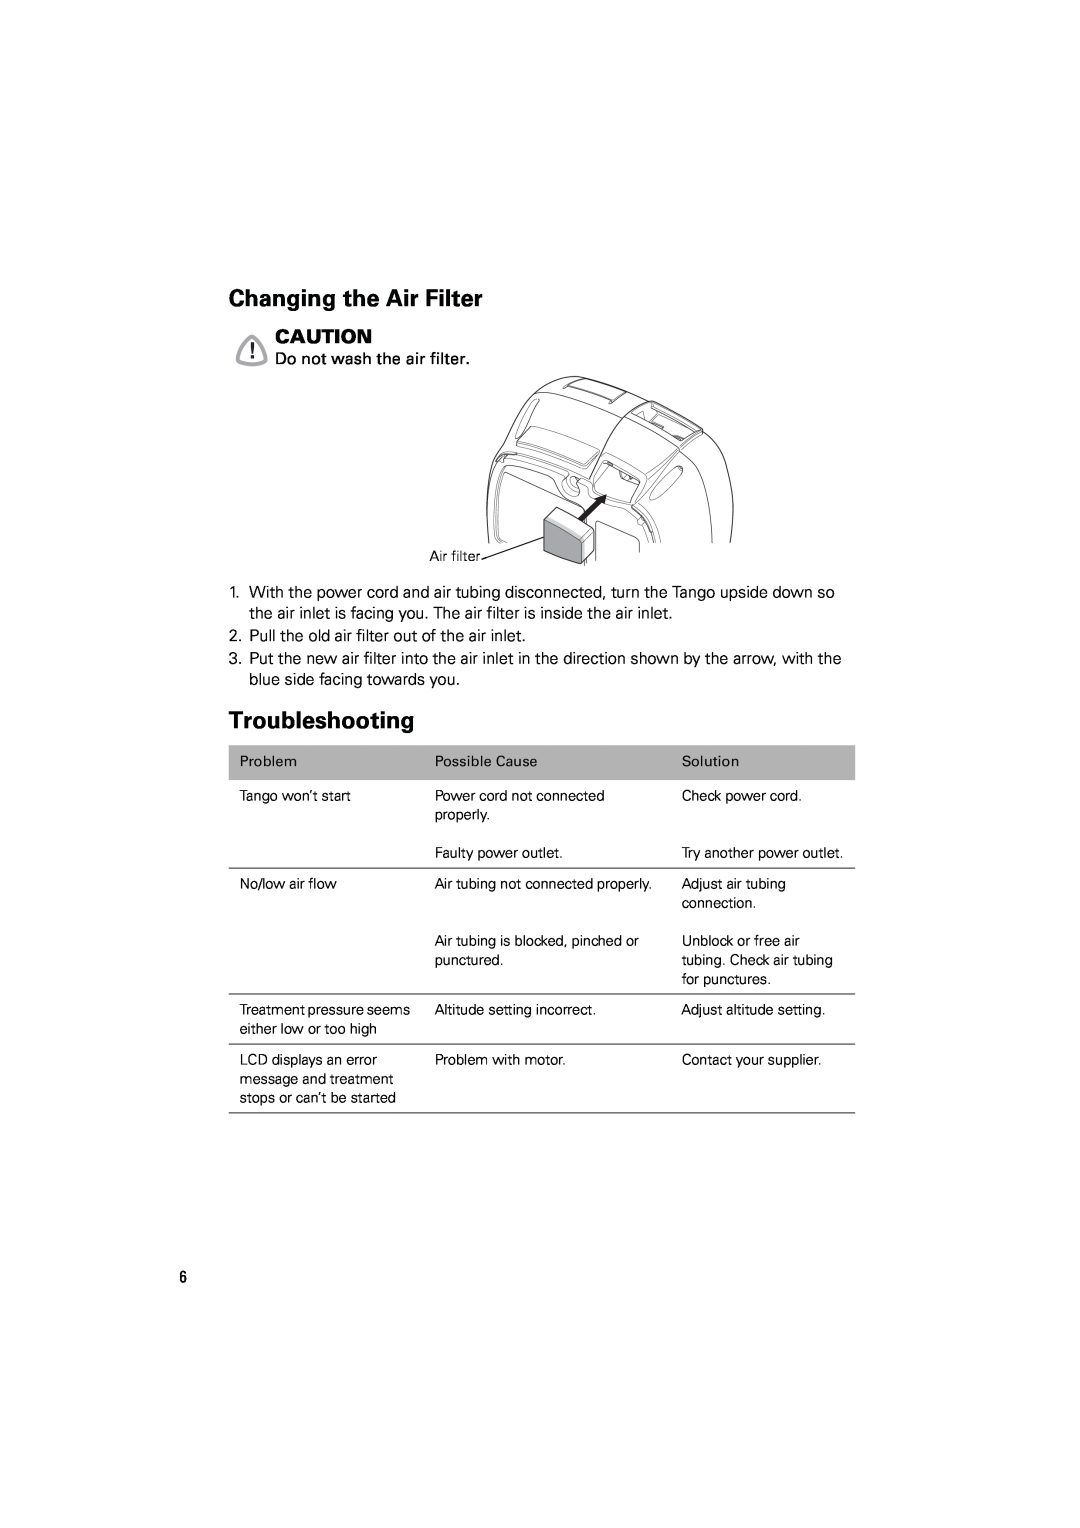 ResMed C-Series manual Changing the Air Filter, Troubleshooting 